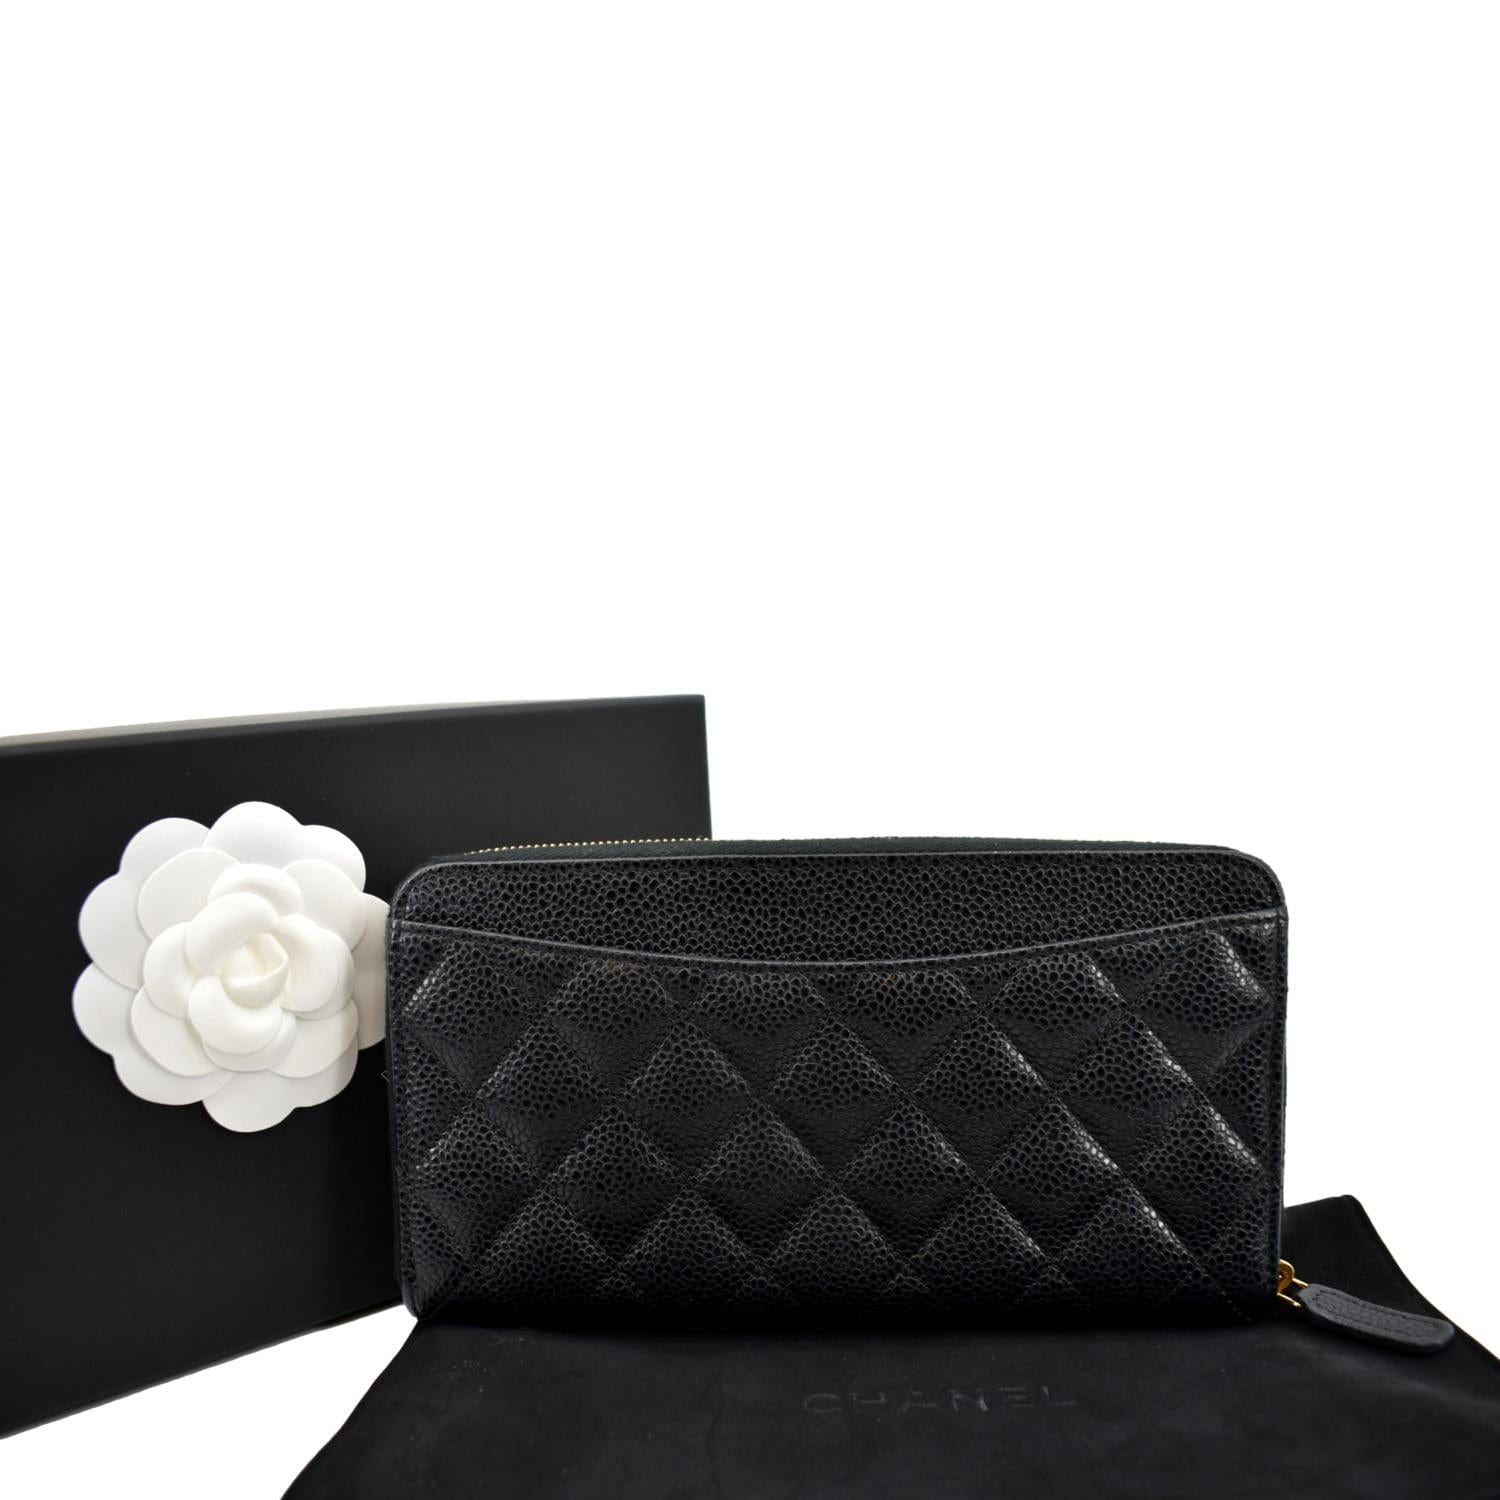 Chanel Long Zippy Caviar Leather Wallet in Black Color